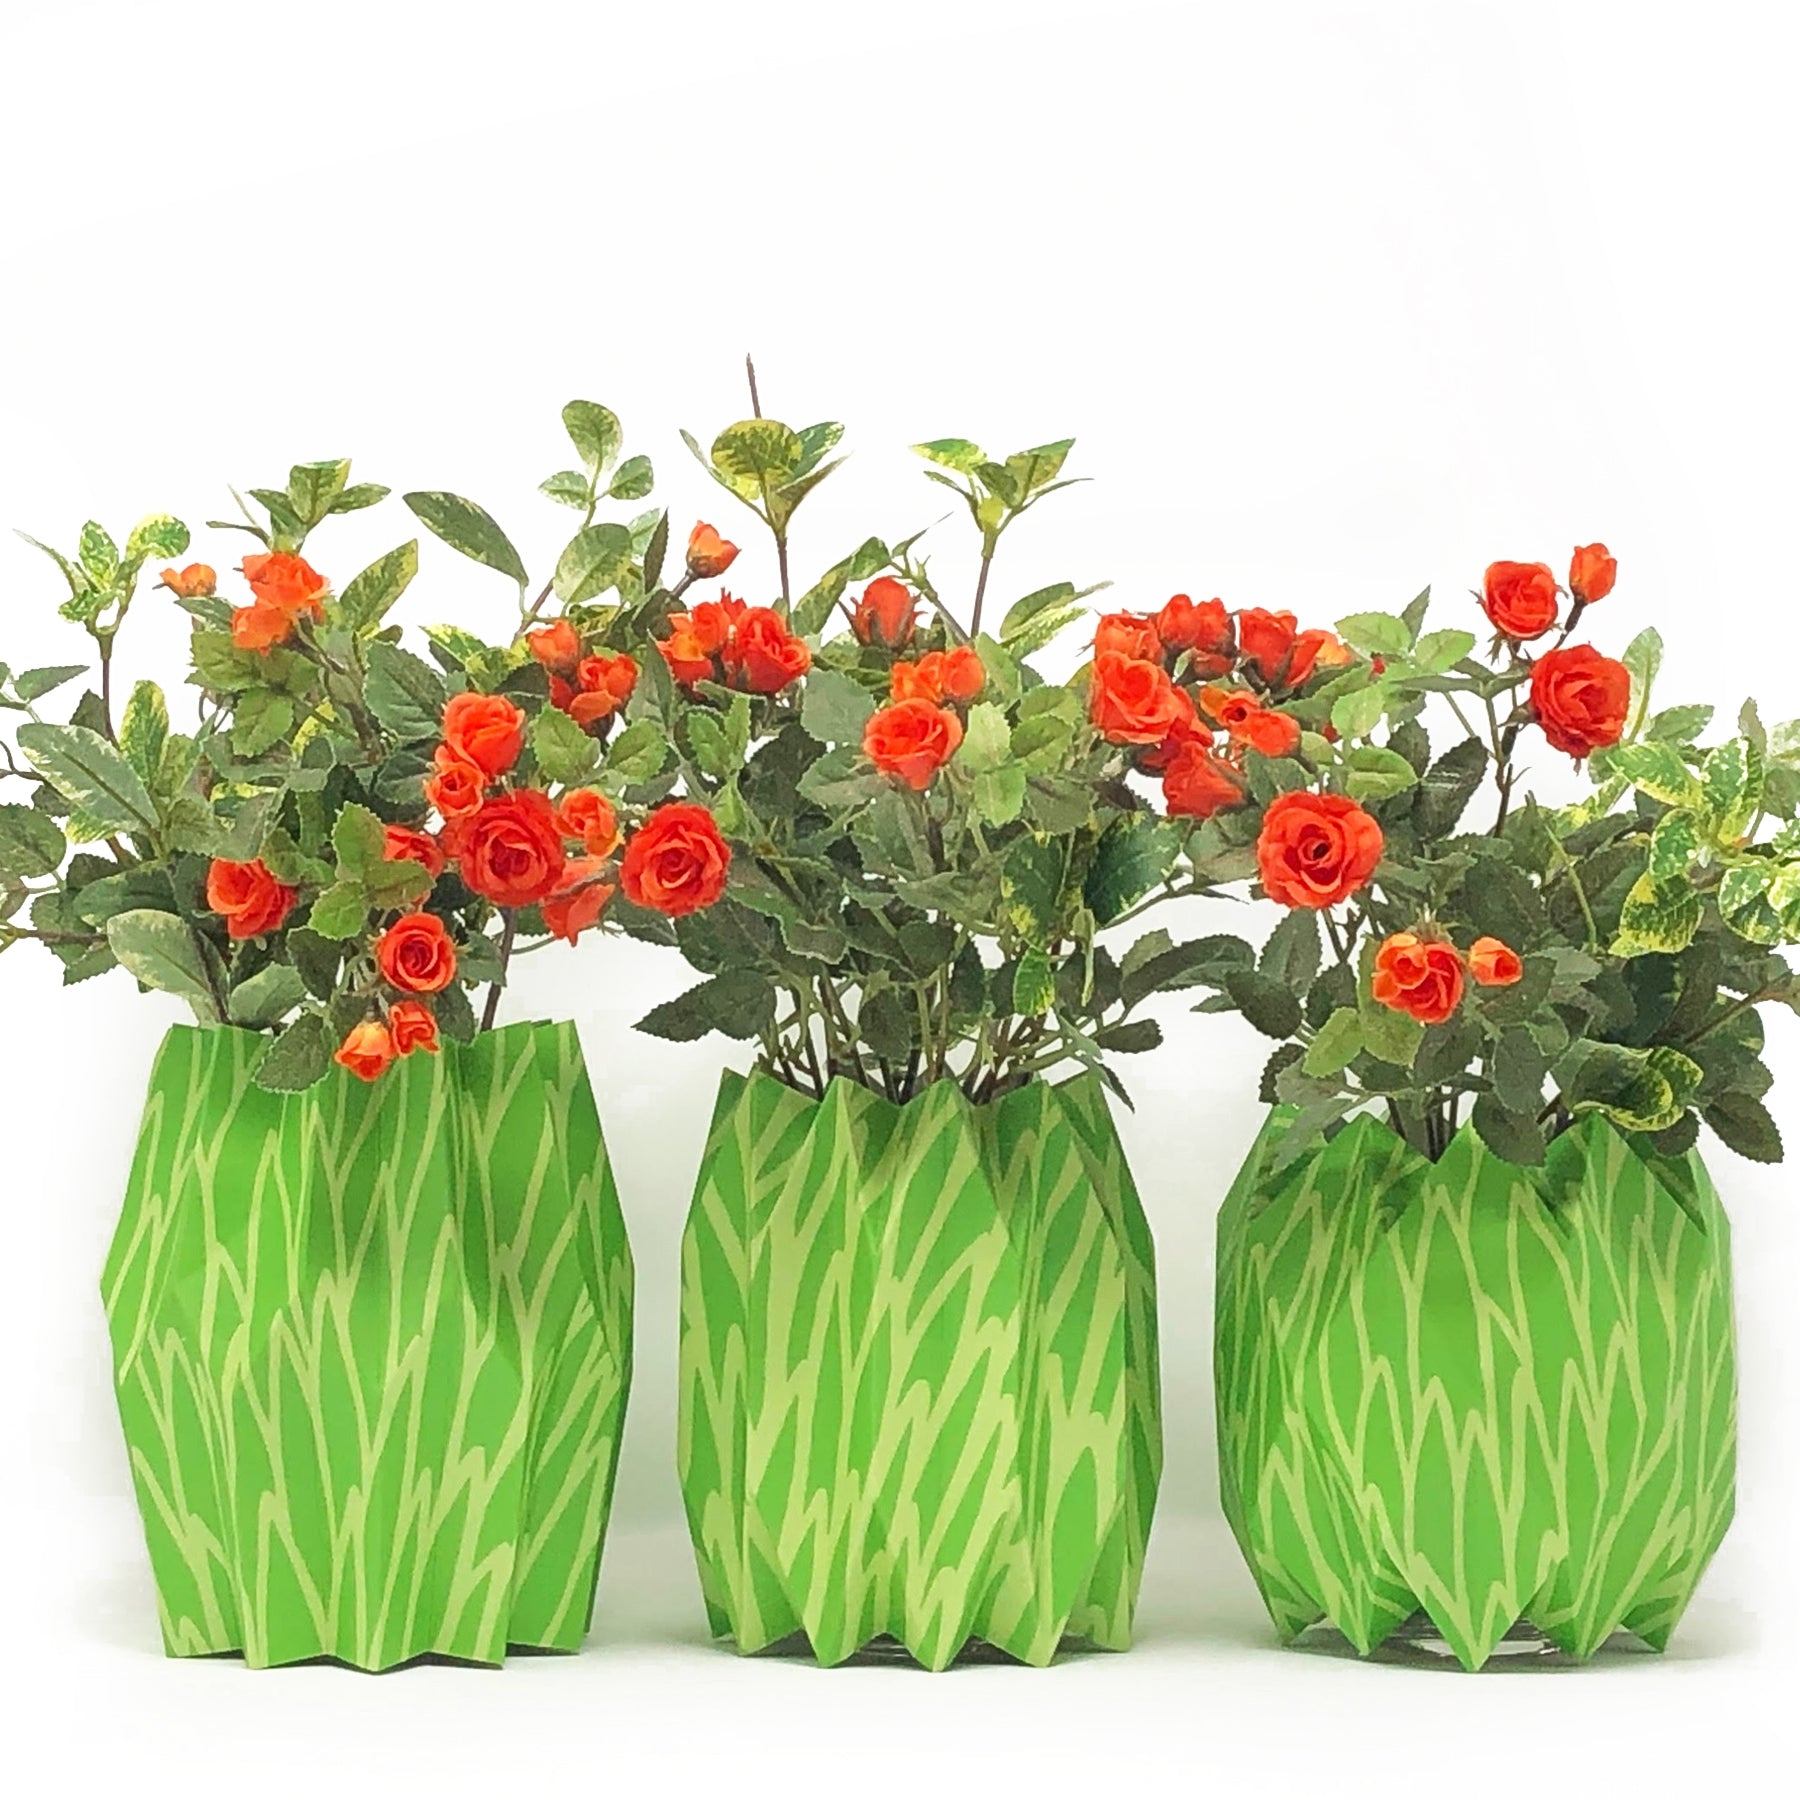 Green Paper Vase Home Decor Lucy Grimes   